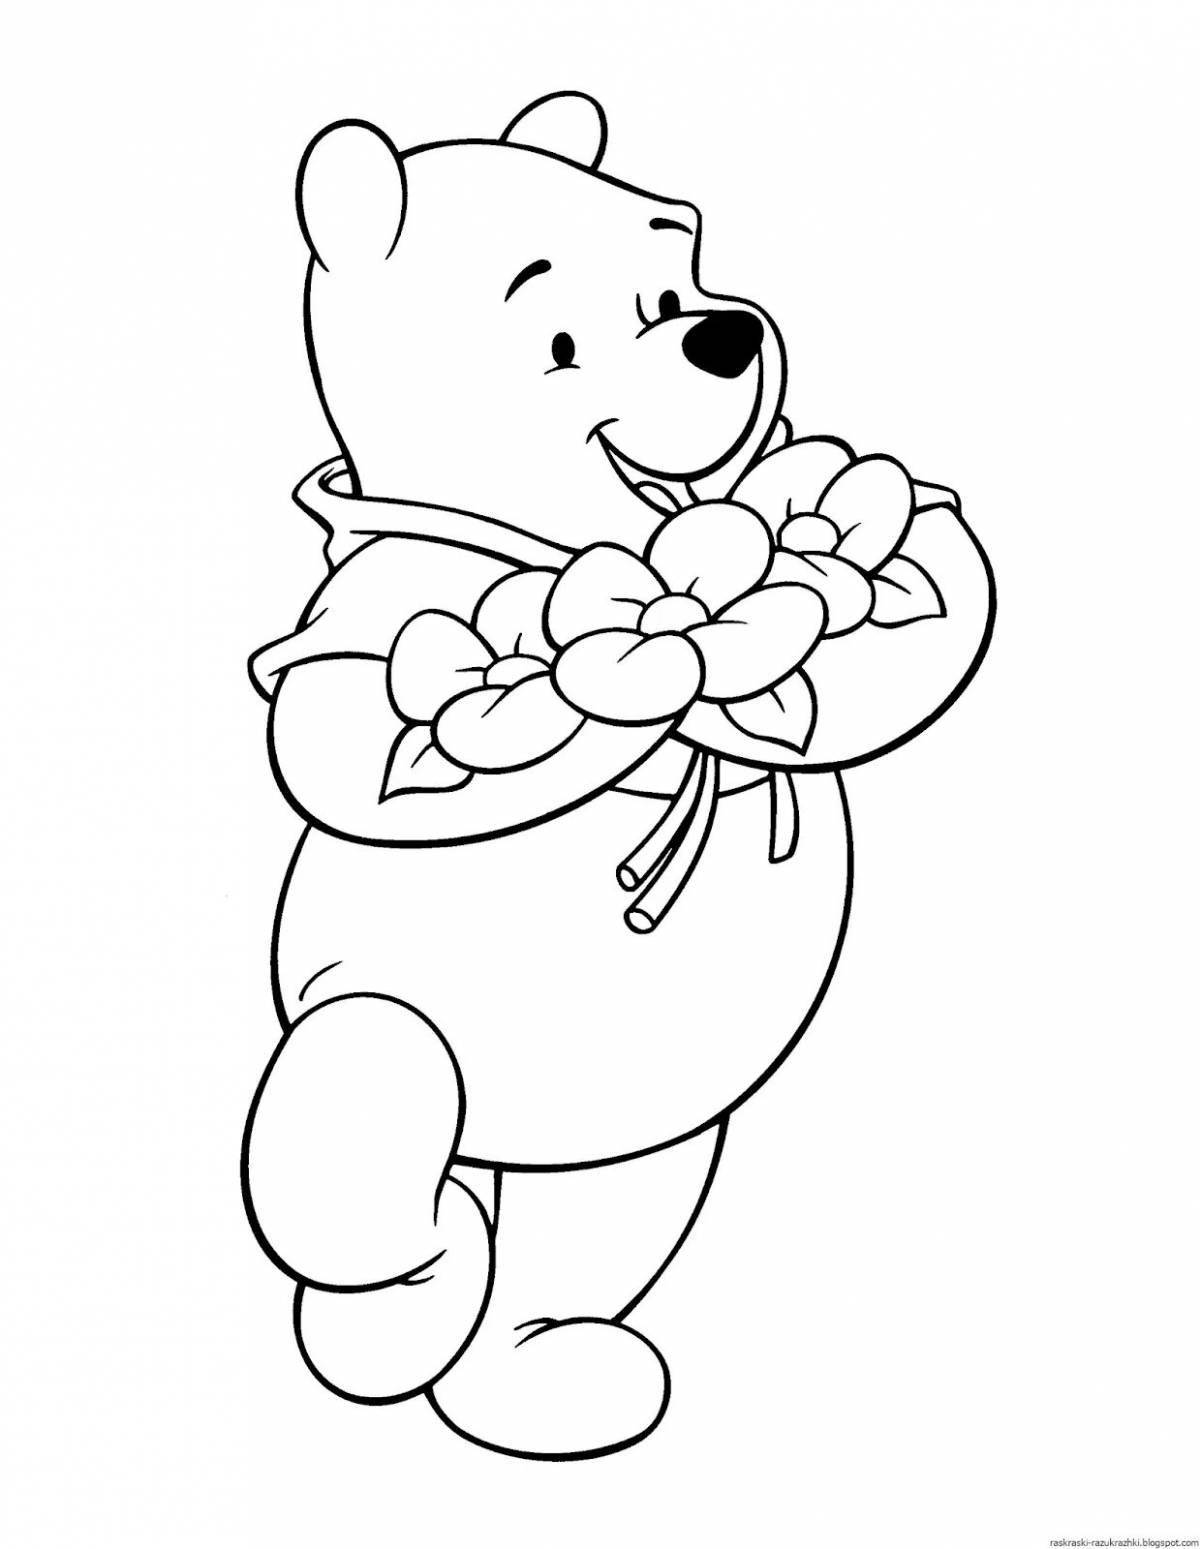 Winnie the pooh for kids #8